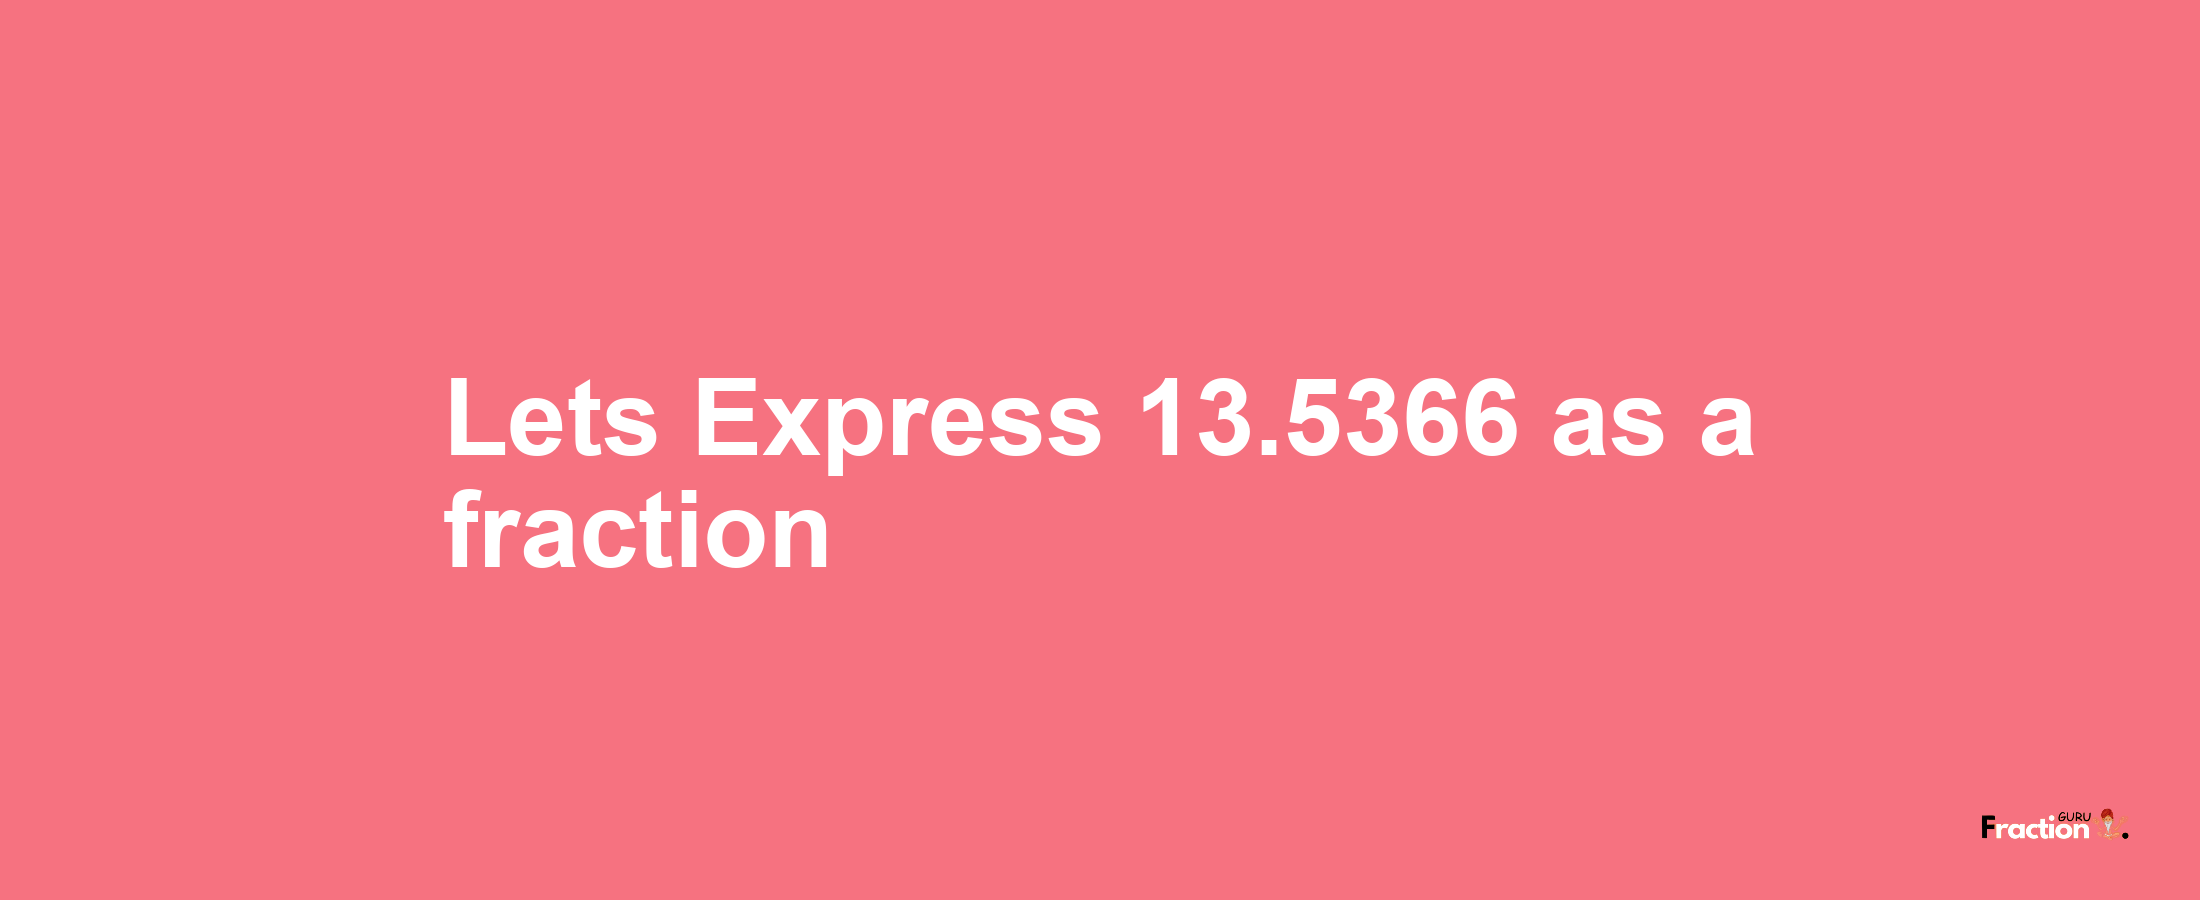 Lets Express 13.5366 as afraction